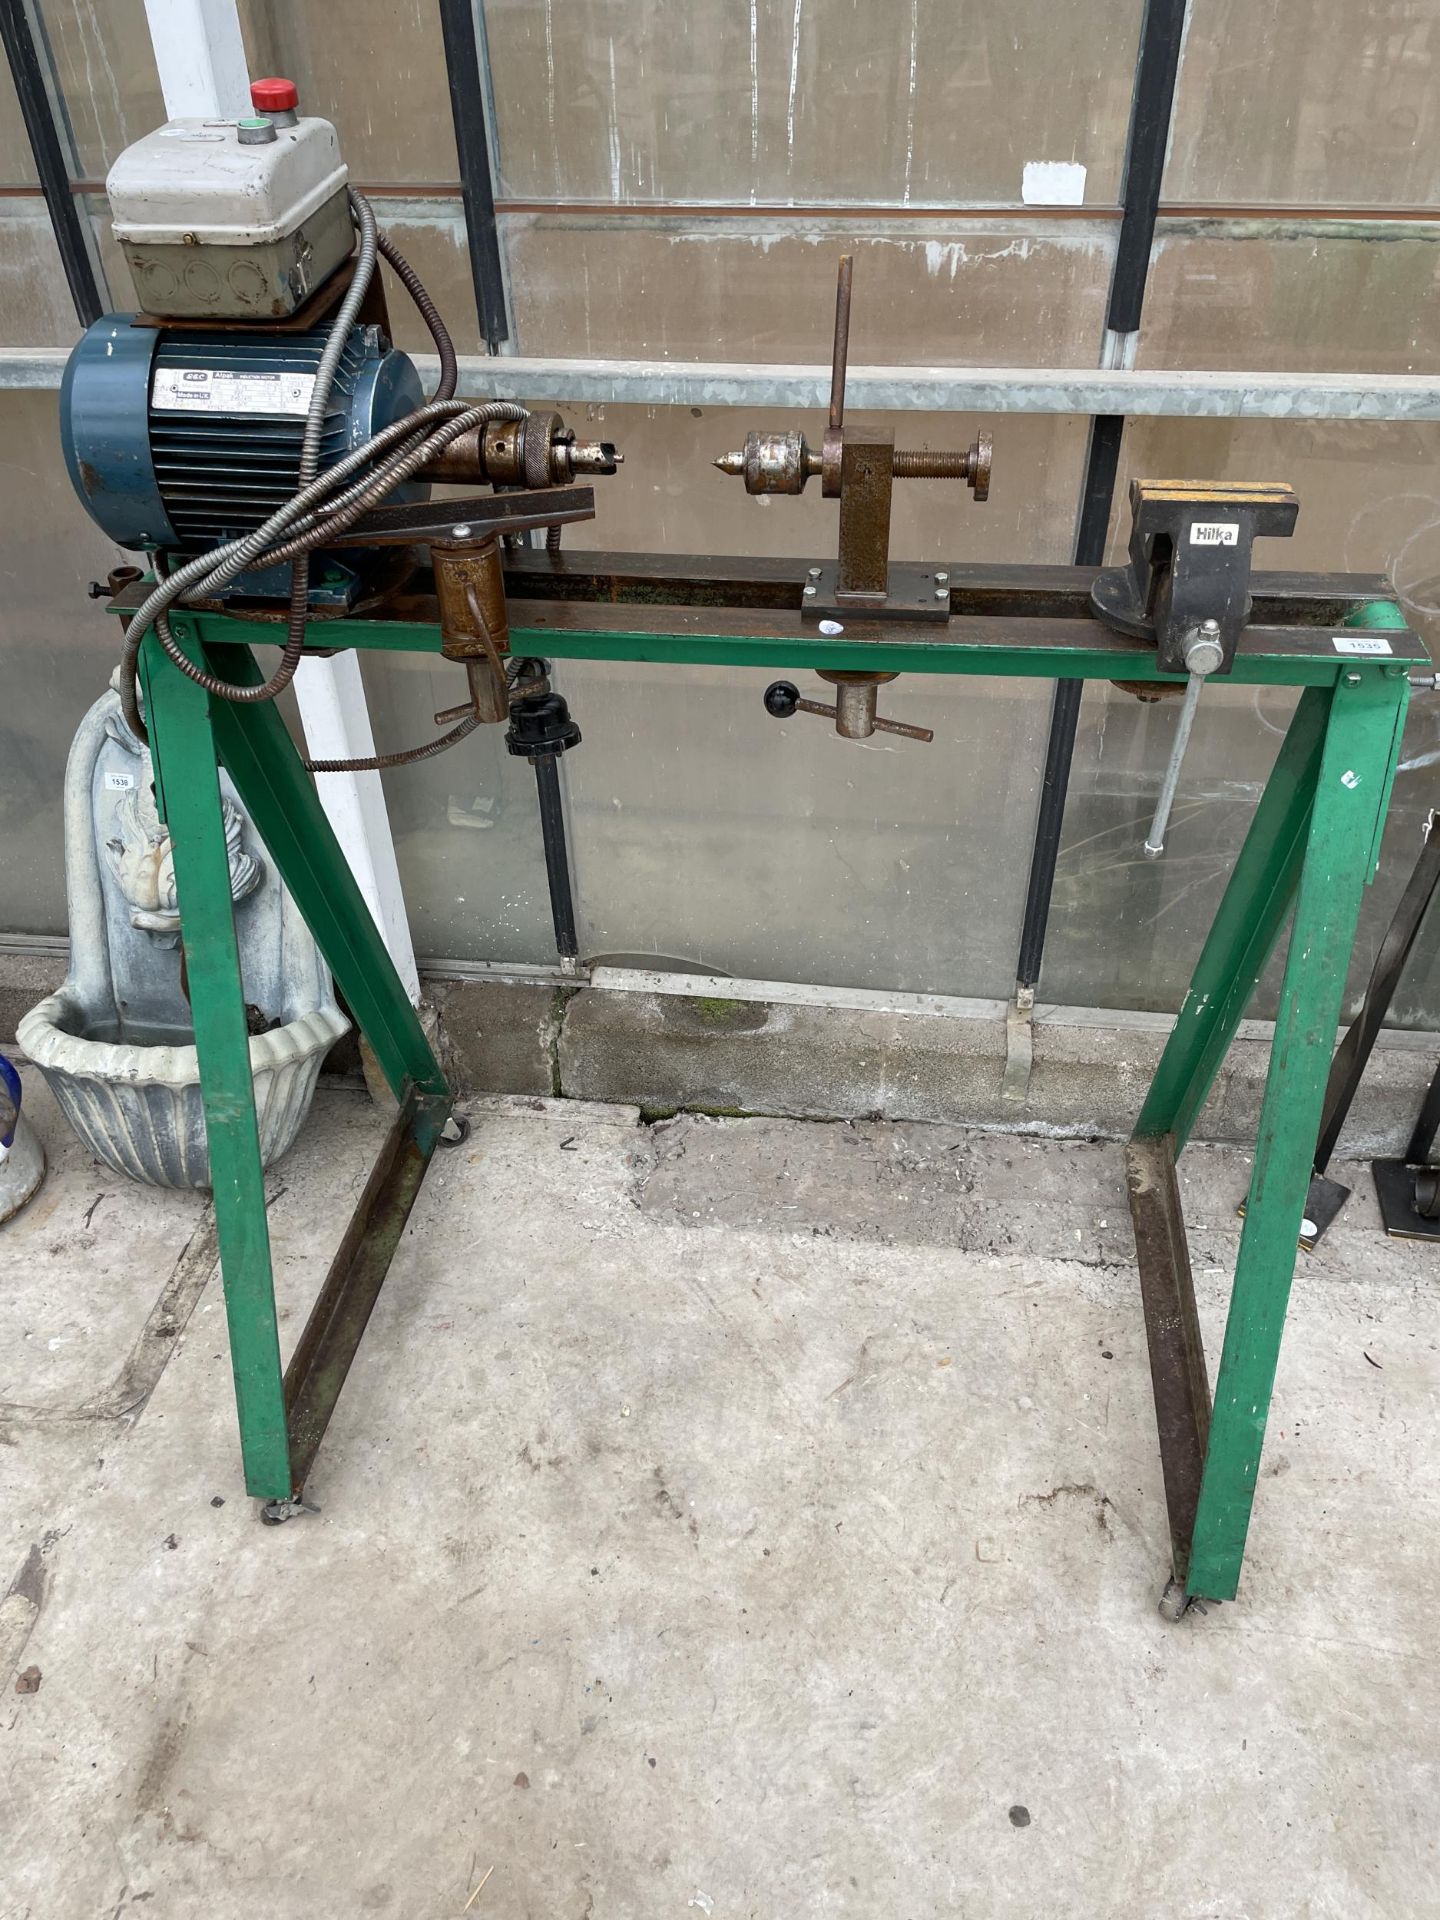 A METAL TURNING LATHE ON A STAND WITH A HILKA BENCH VICE